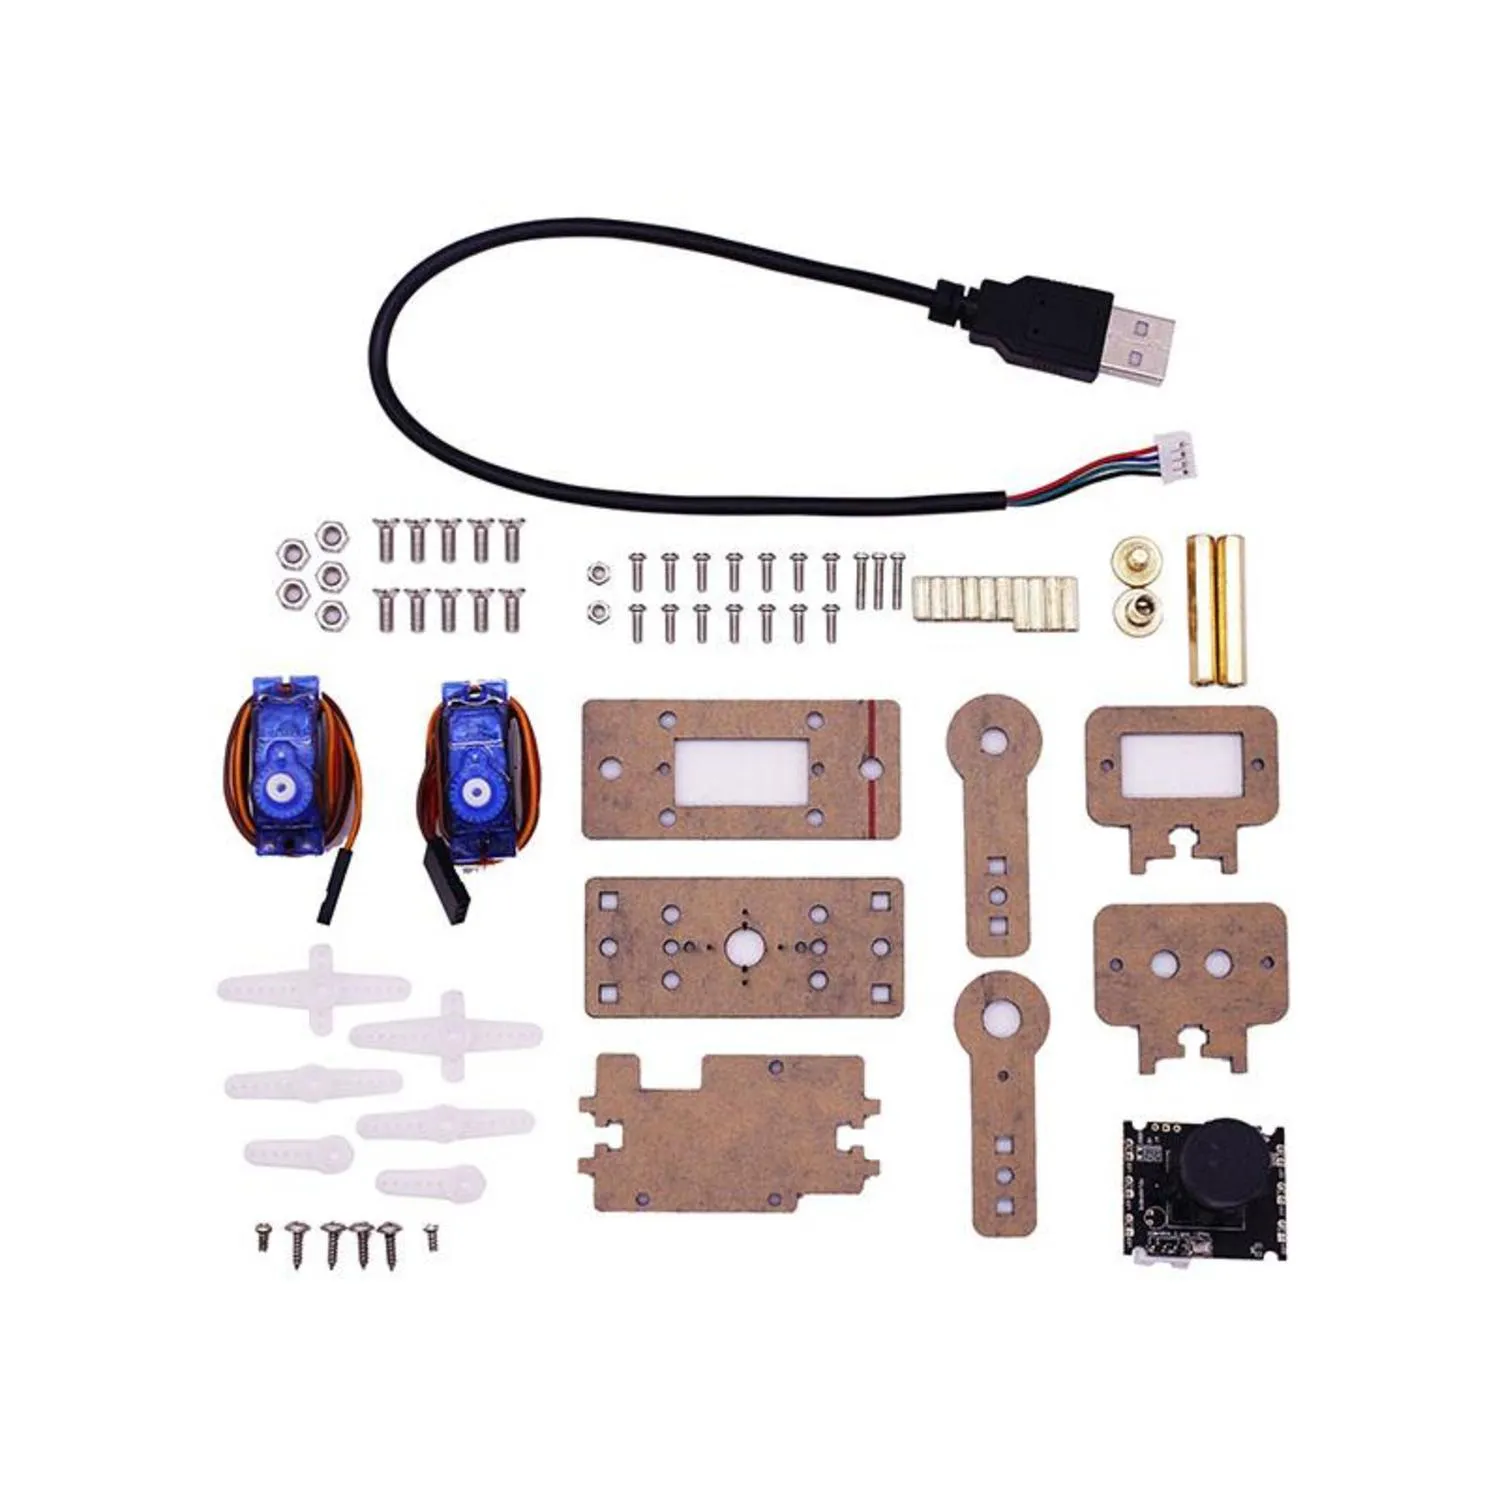 Photo of Yahboom HD Camera Pan-Tilt Kit with 2 Pcs SG90 Micro Servos for robot car